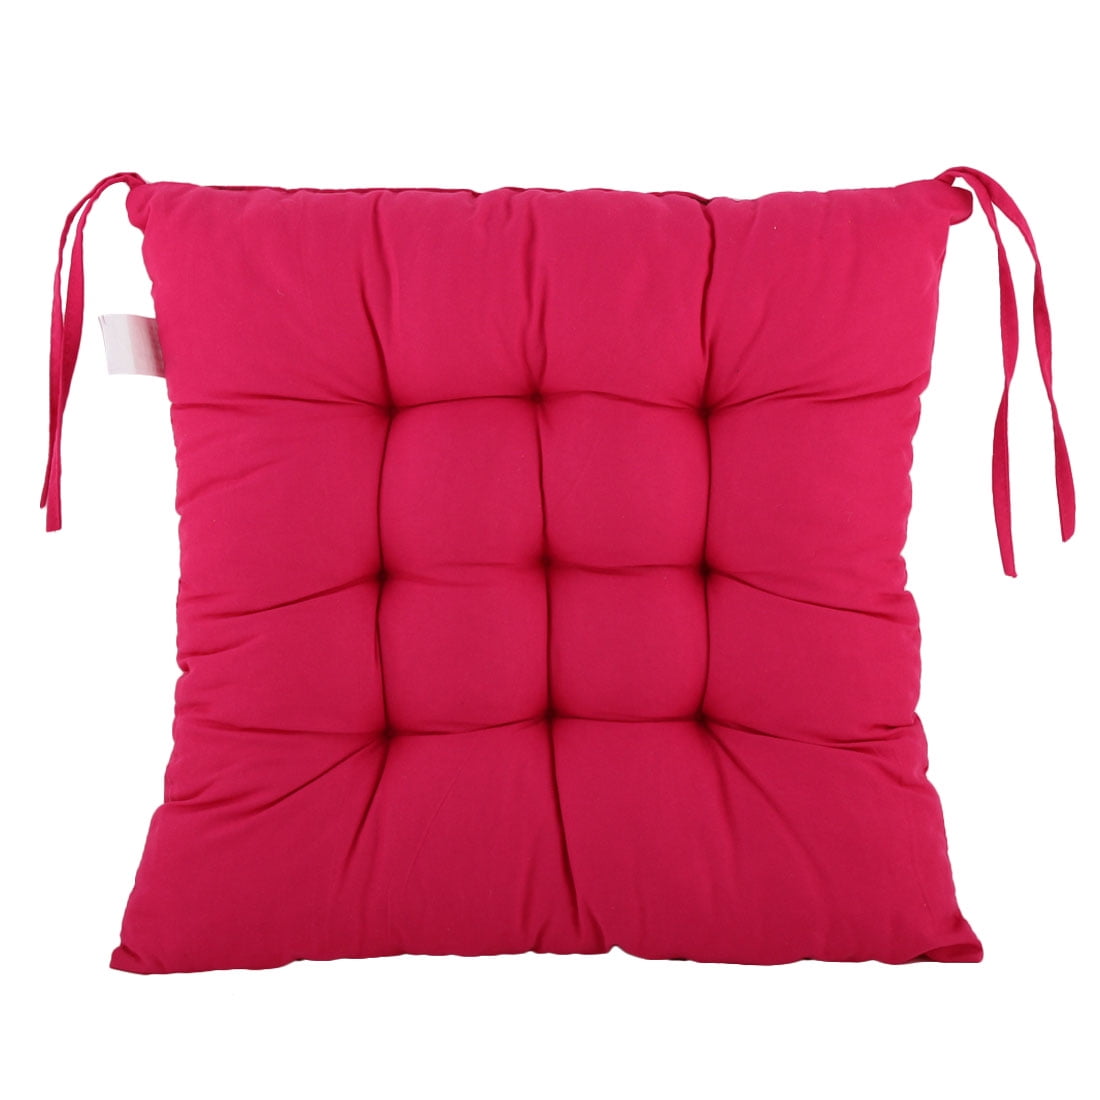 Modern Chair Cushion For Back Pain Walmart for Small Space